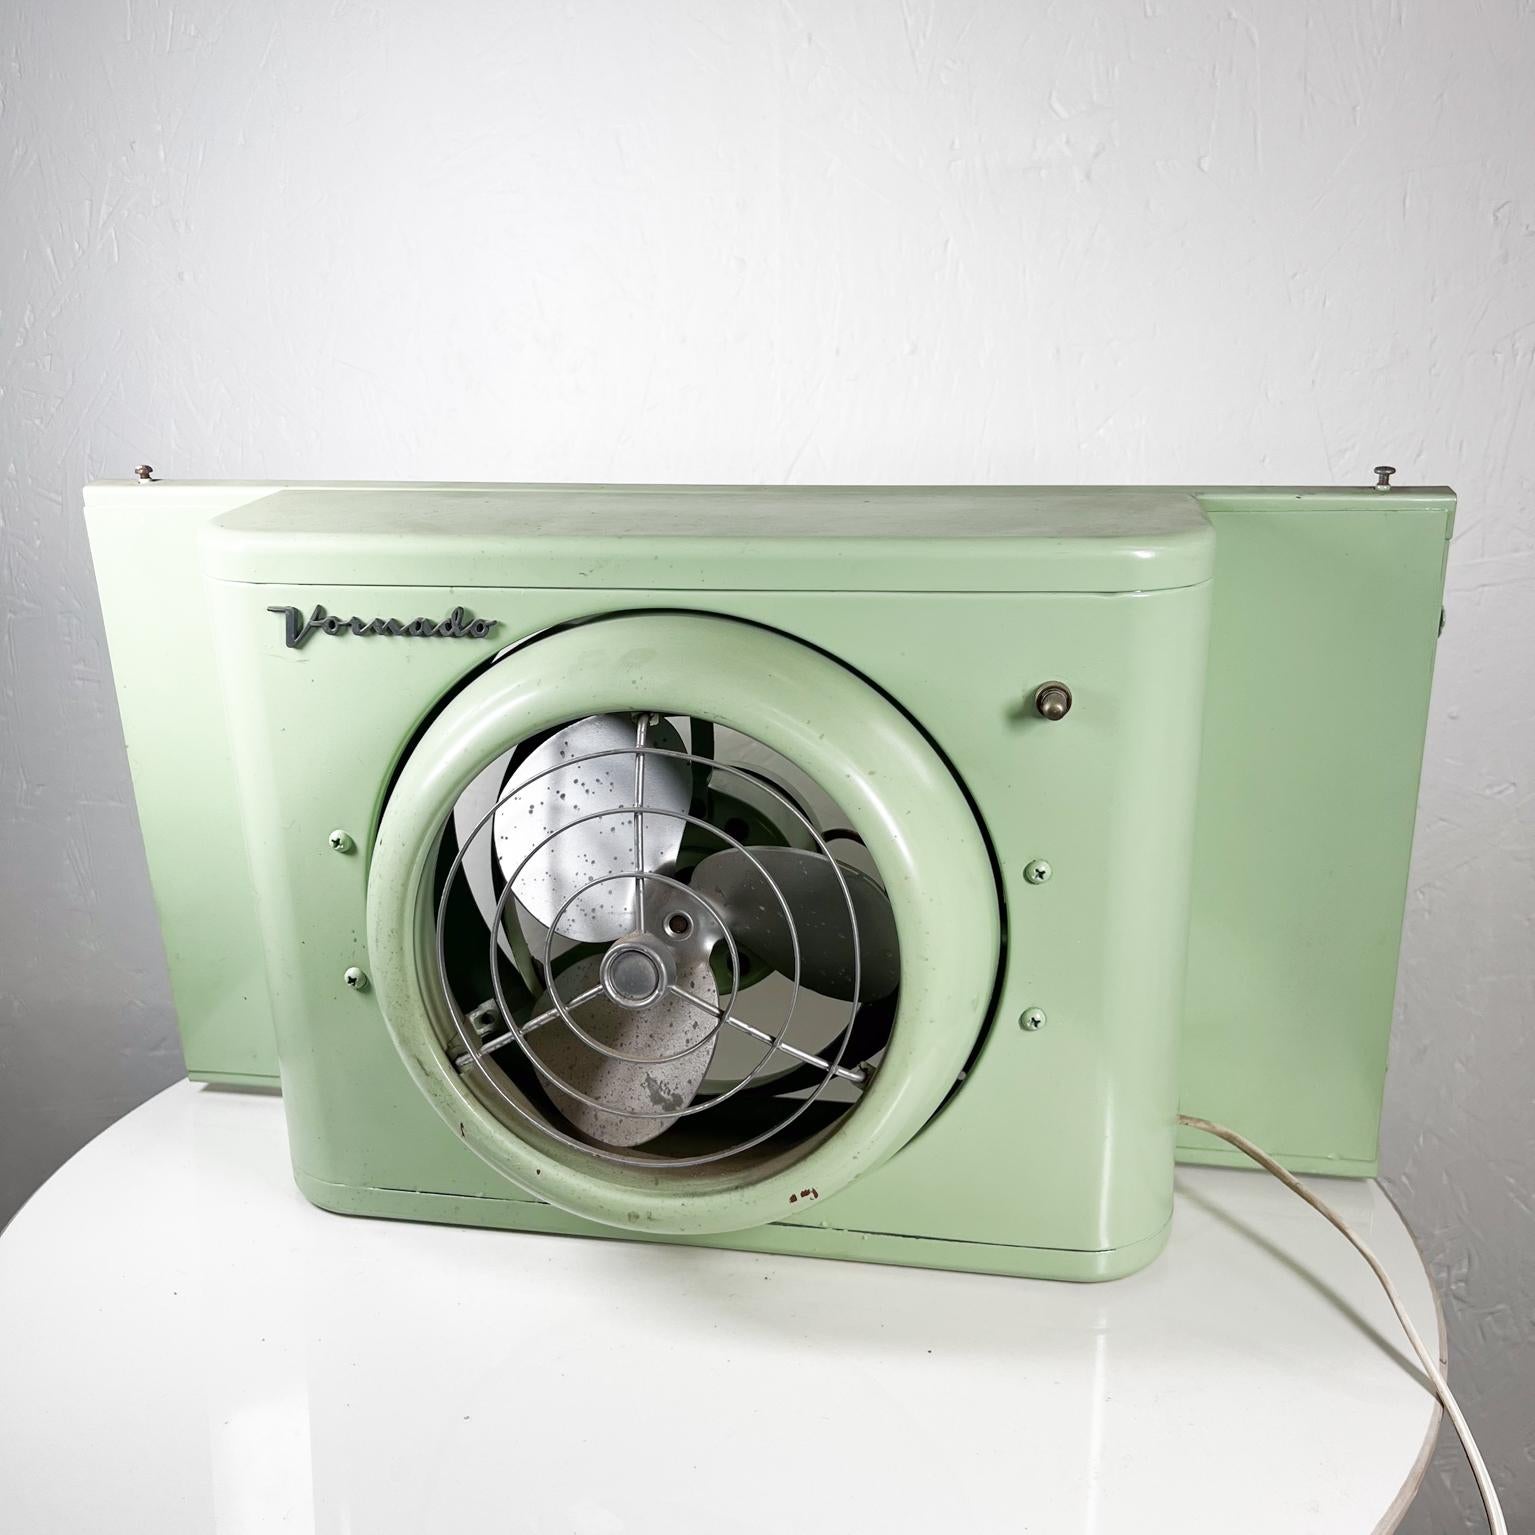 1950s Vintage Wall Unit Vornado Pistachio Green Electric Window Fan
12 h x 22 w x 8 d
Preowned unrestored untested vintage condition.
Refer to all images please.

